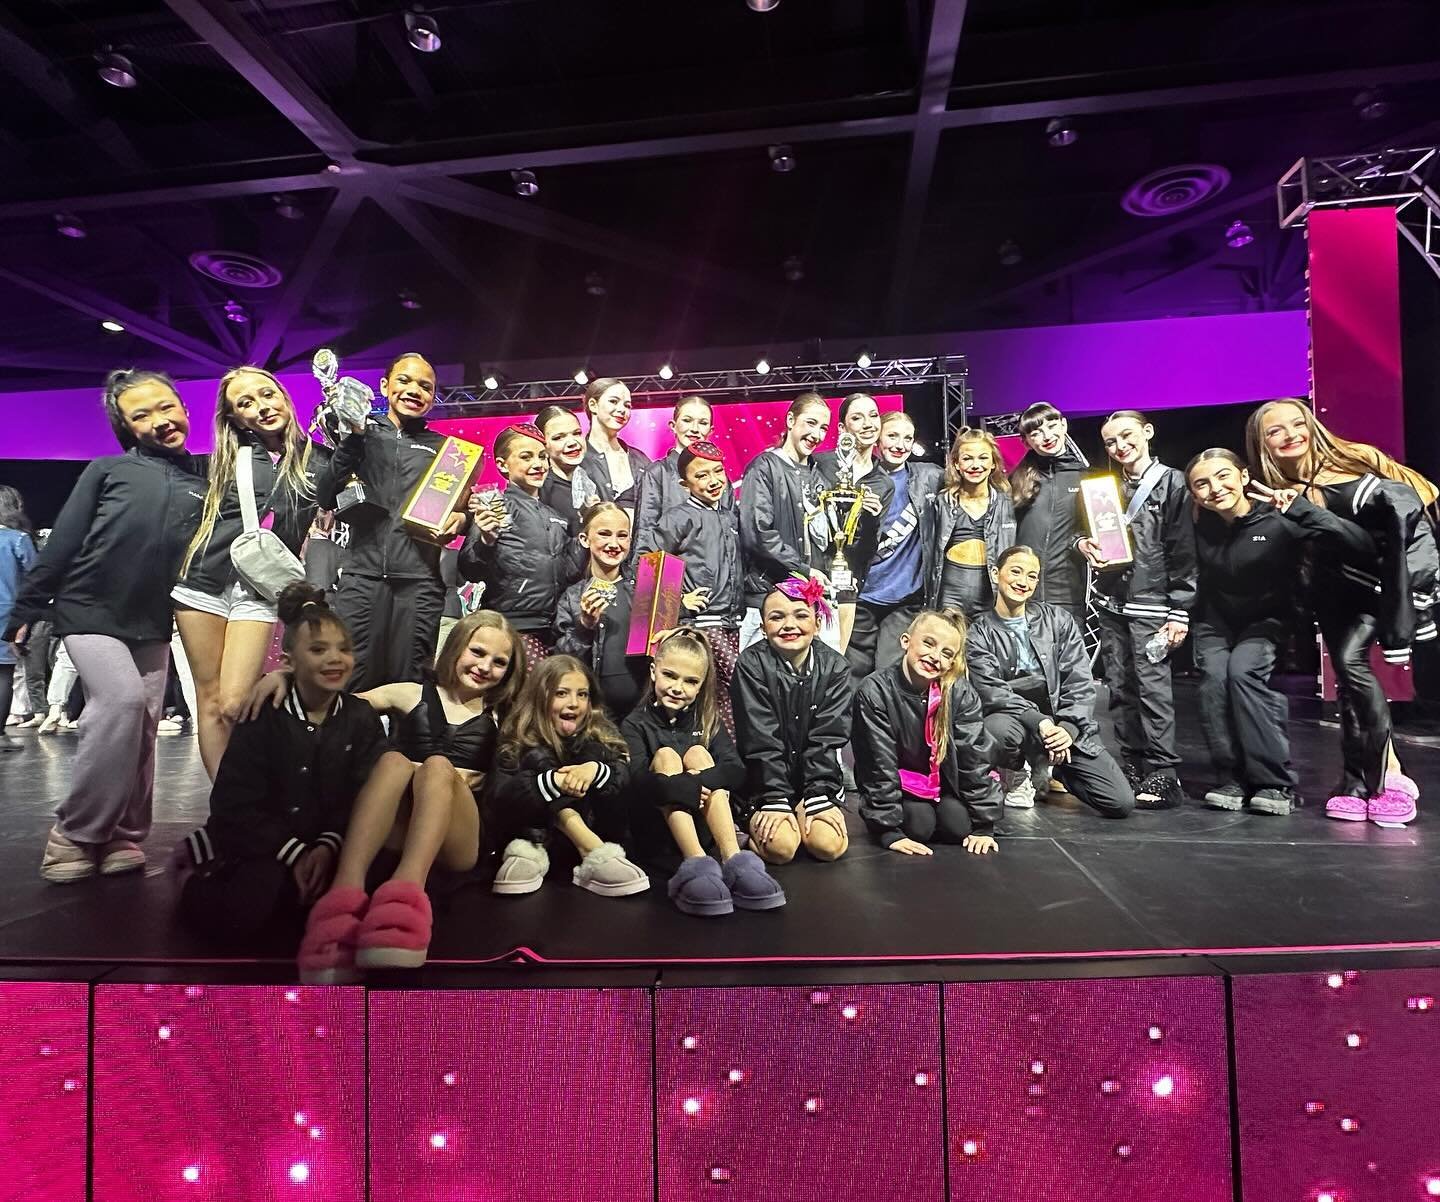 Our Company dancers had the BEST time at @goshowstopper over the weekend! They danced their hearts out and we couldn&rsquo;t be more proud of them both on and off the stage. Now for some shoutouts! Let&rsquo;s hear it for our Minis and Juniors! 👏👏?